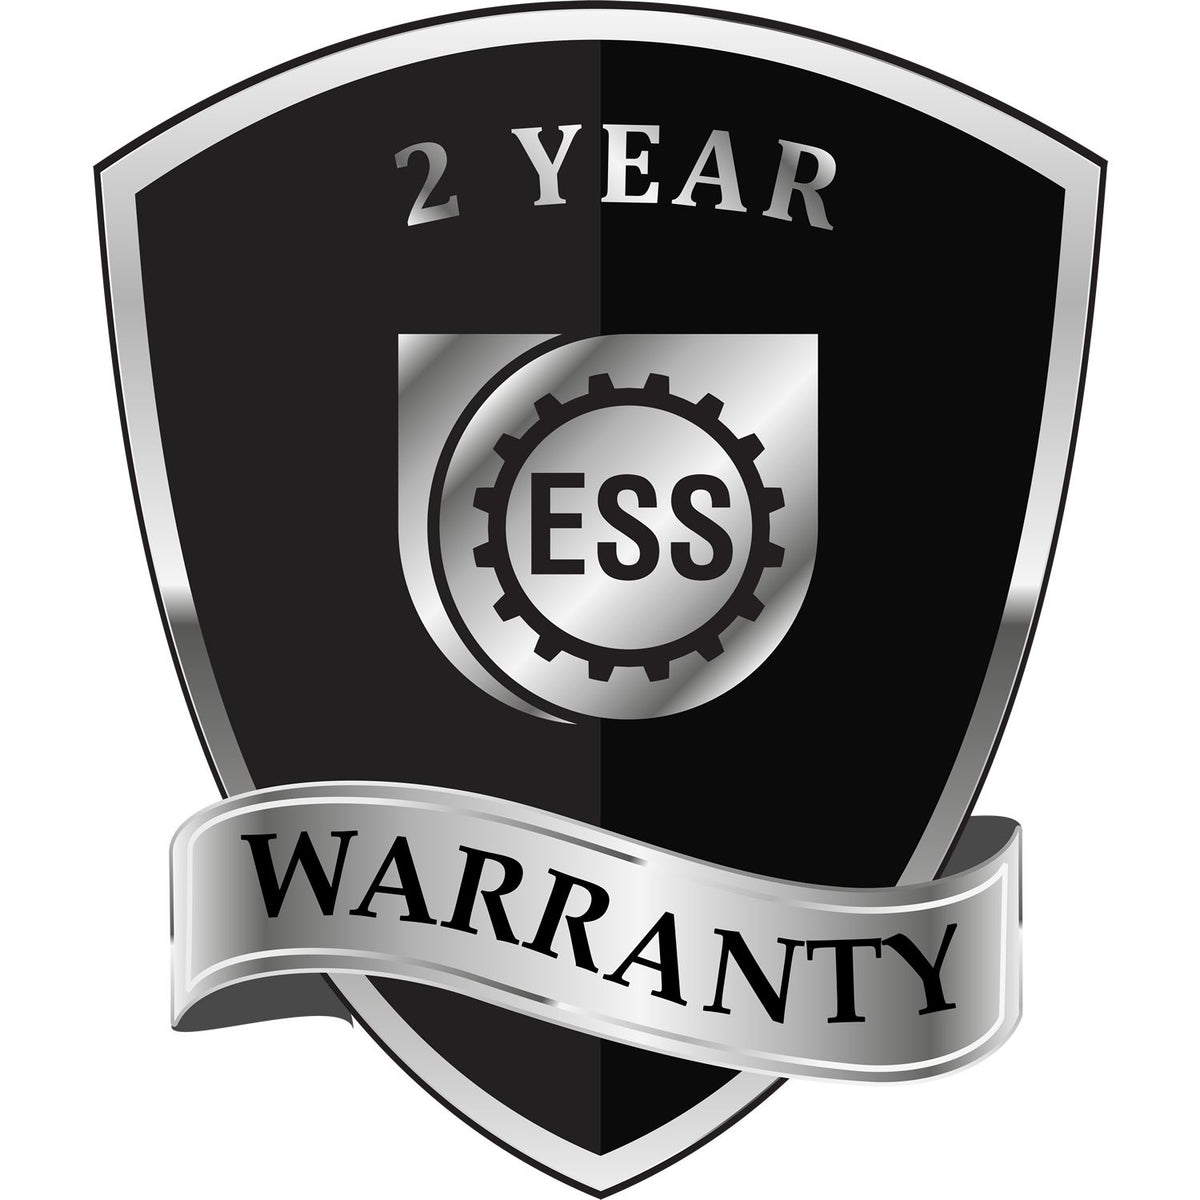 A badge or emblem showing a warranty icon for the Long Reach Vermont PE Seal